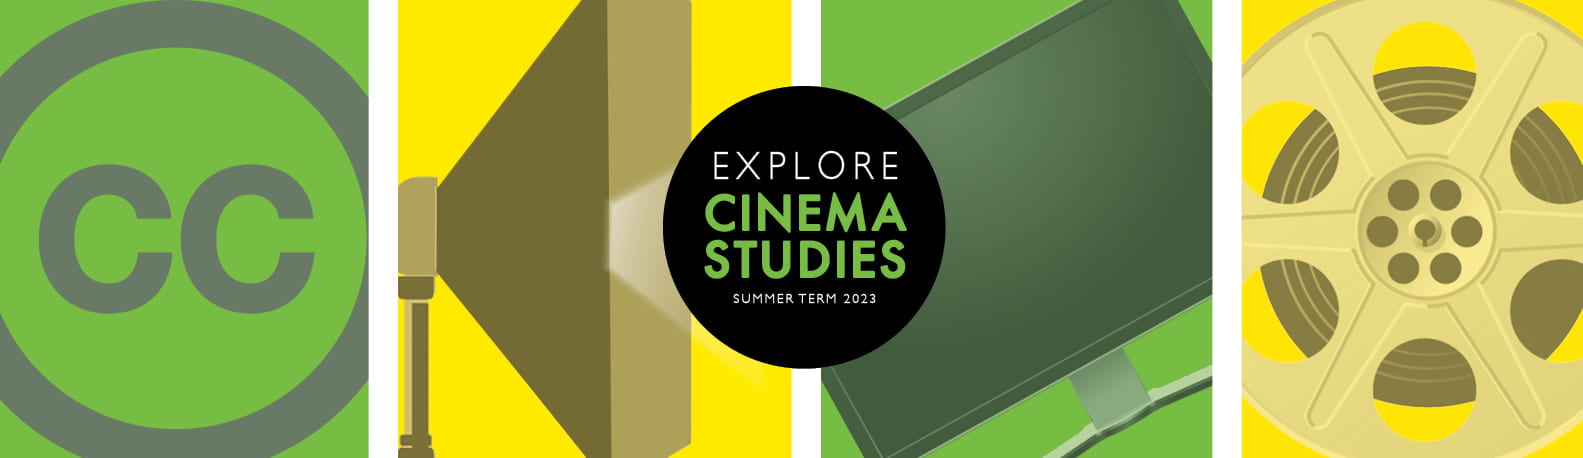 Study cinema in the summer